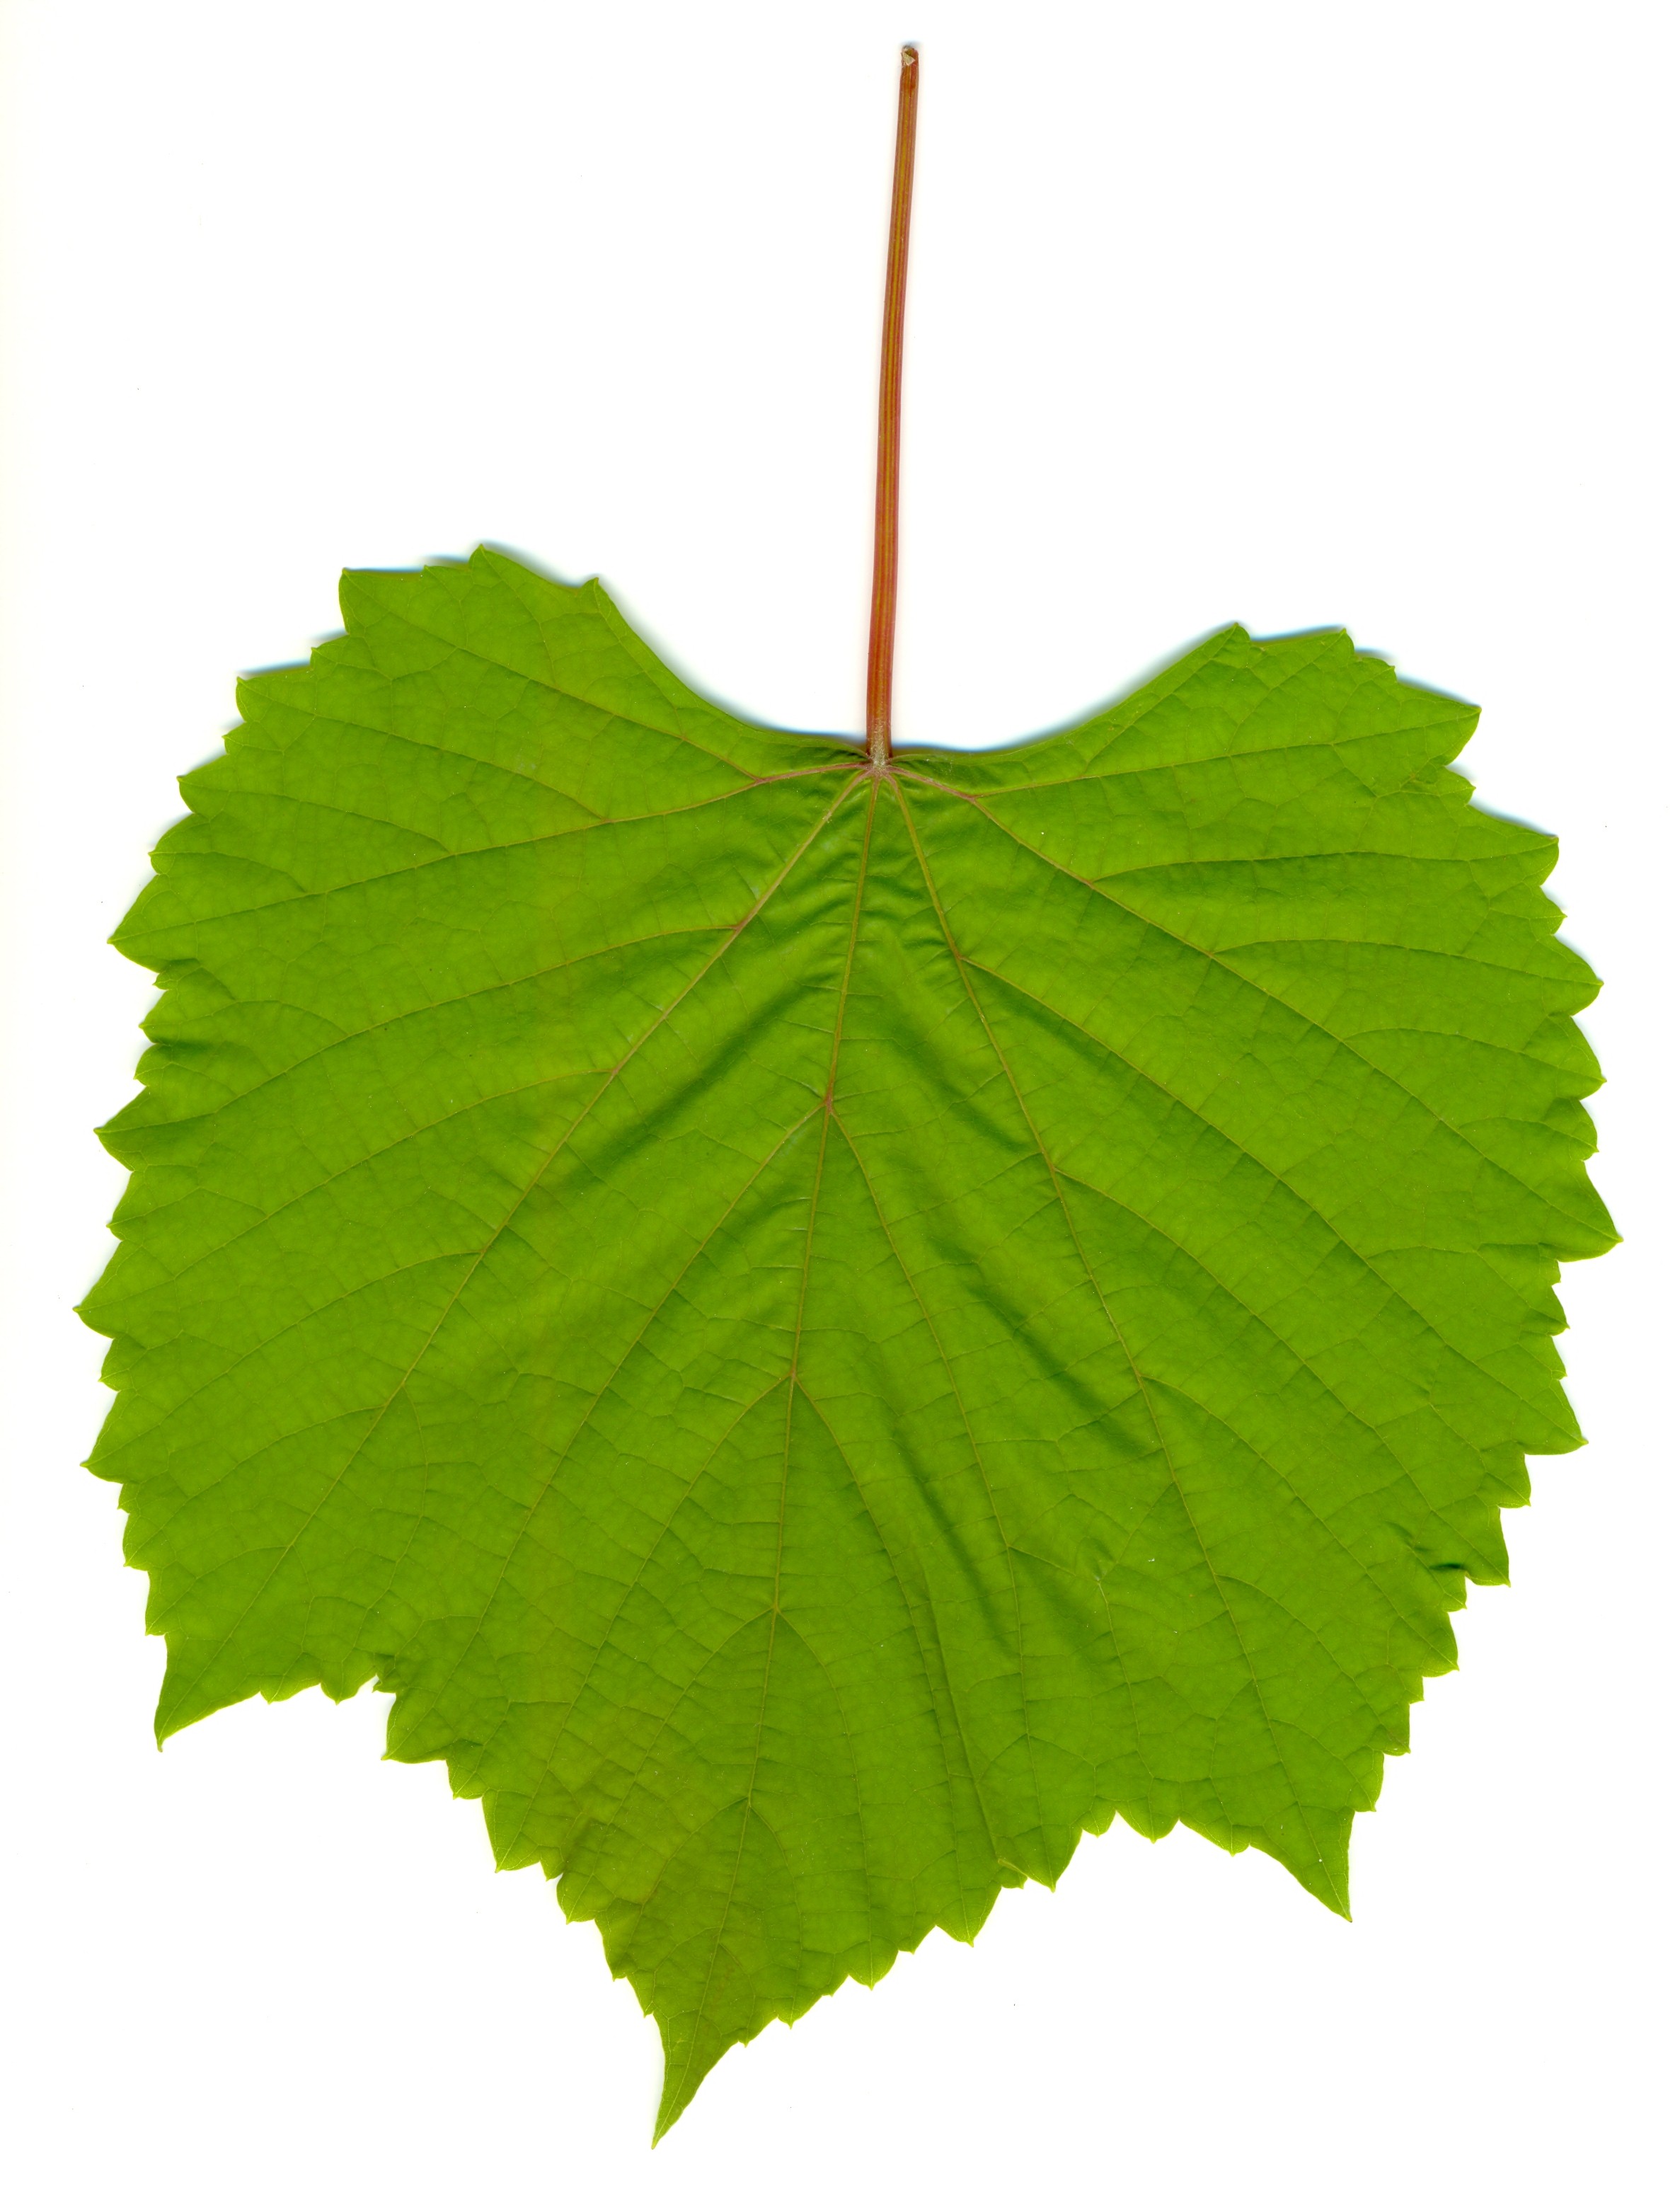 Grape leaf 01.jpg - Clipart library - Clipart library